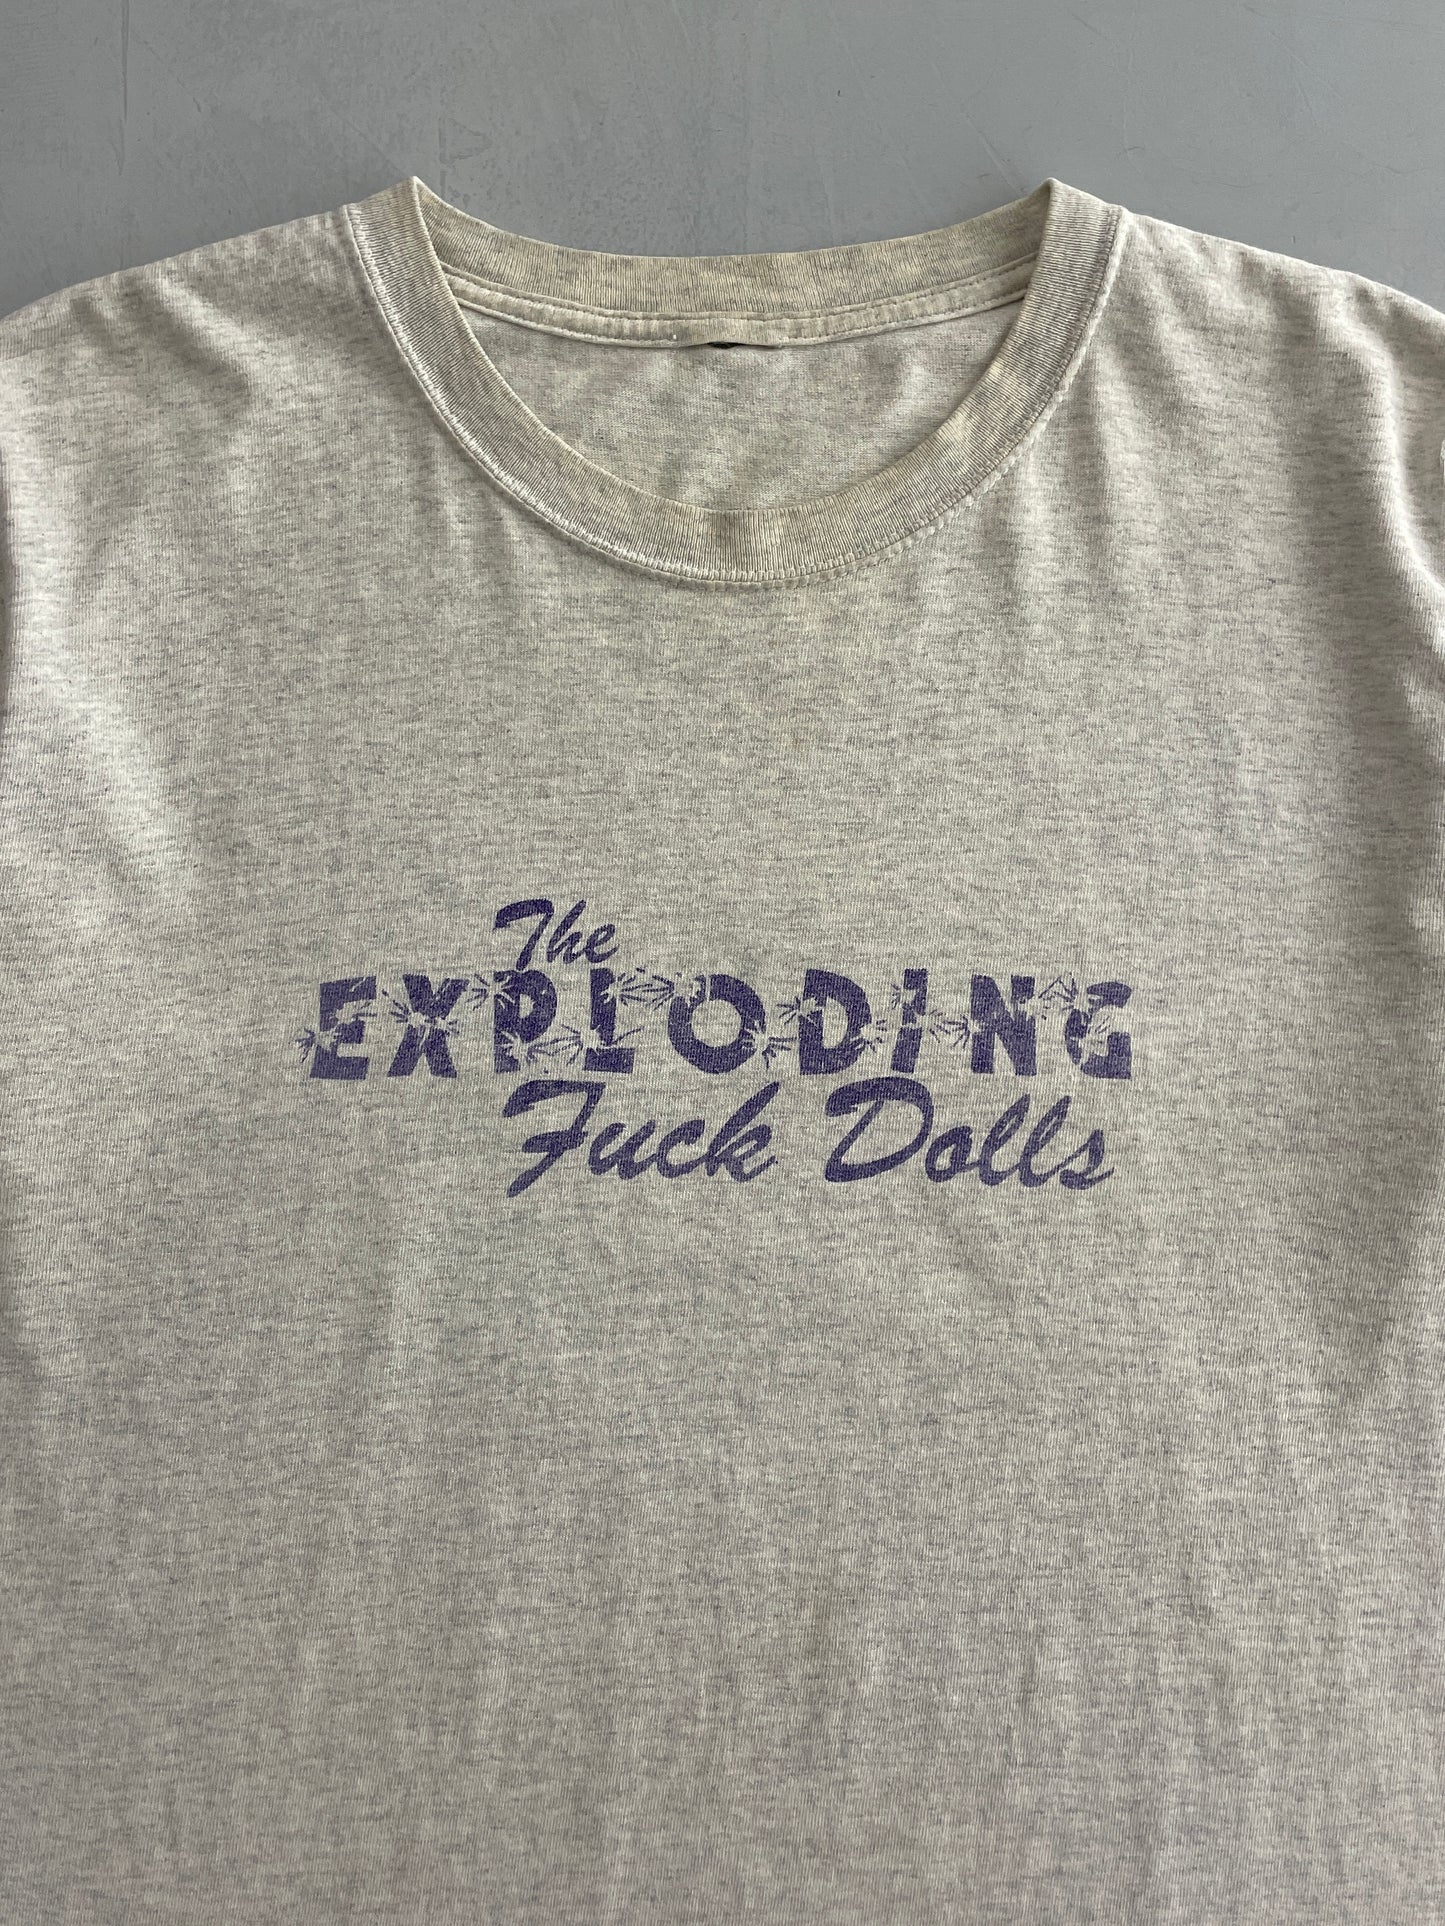 90's The Exploding Fuck Dolls 'This Side Up!' Tour Tee [L/XL]